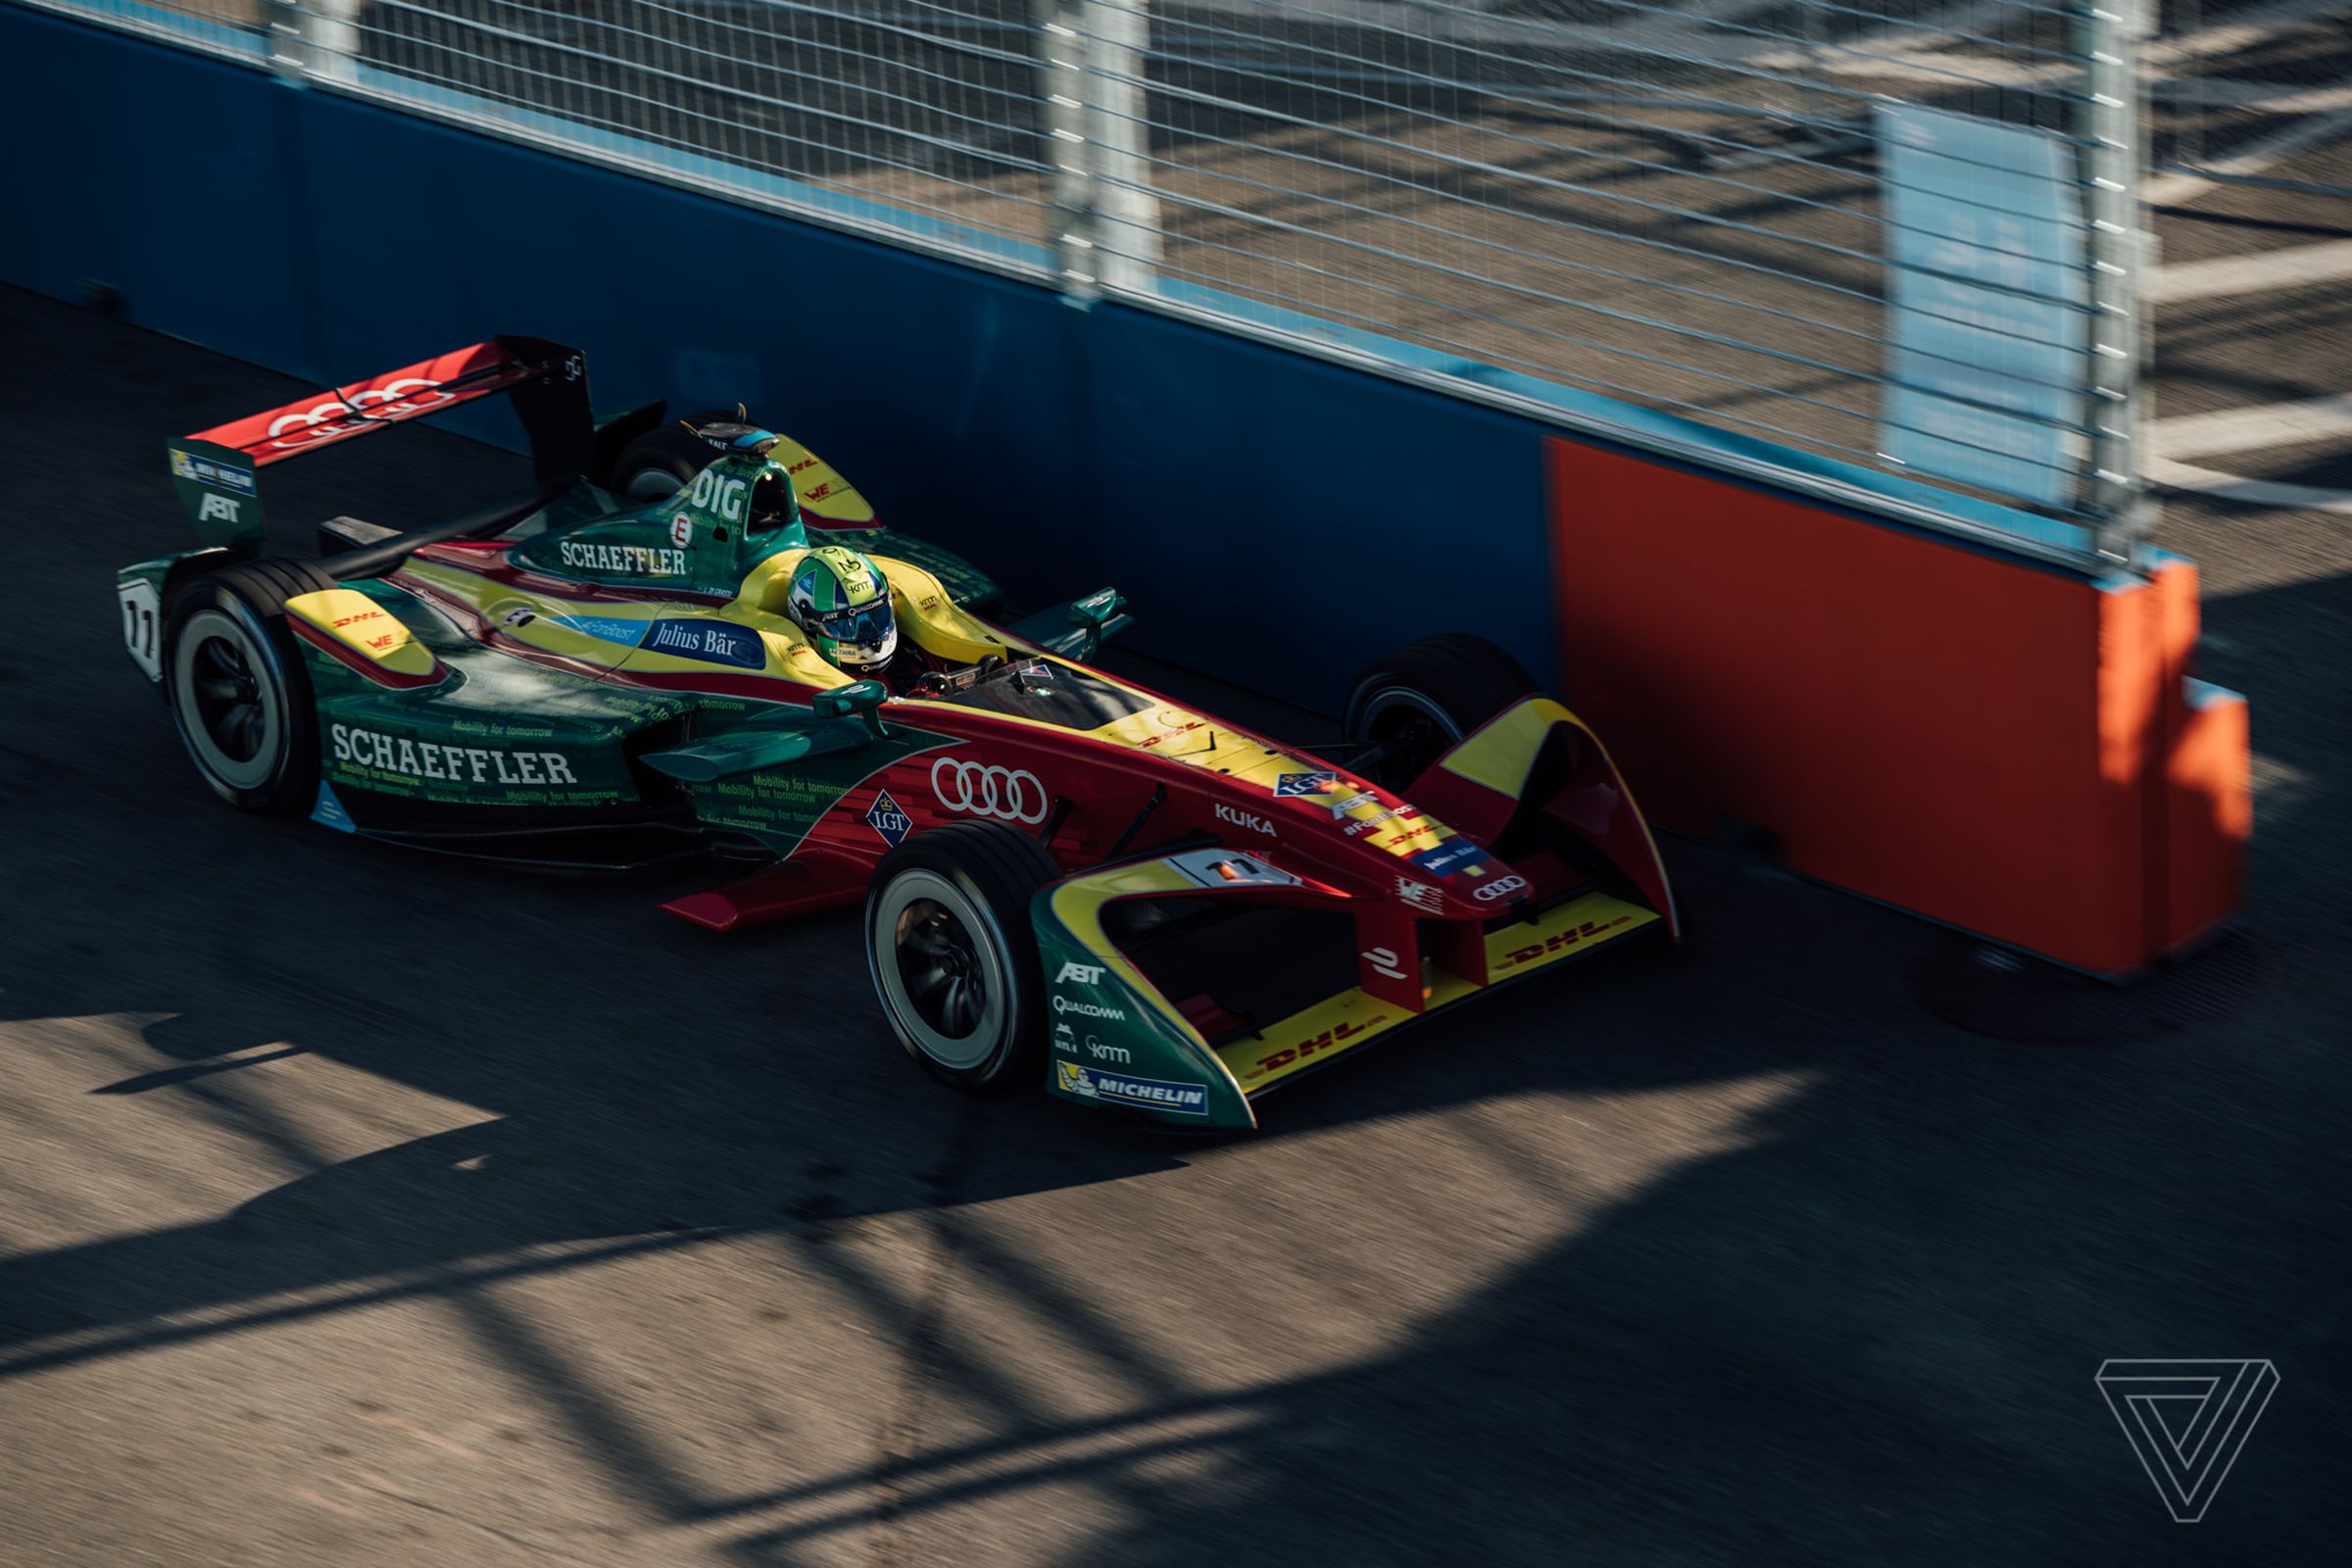 Lucas di Grassi on the track in Sunday’s morning practice.